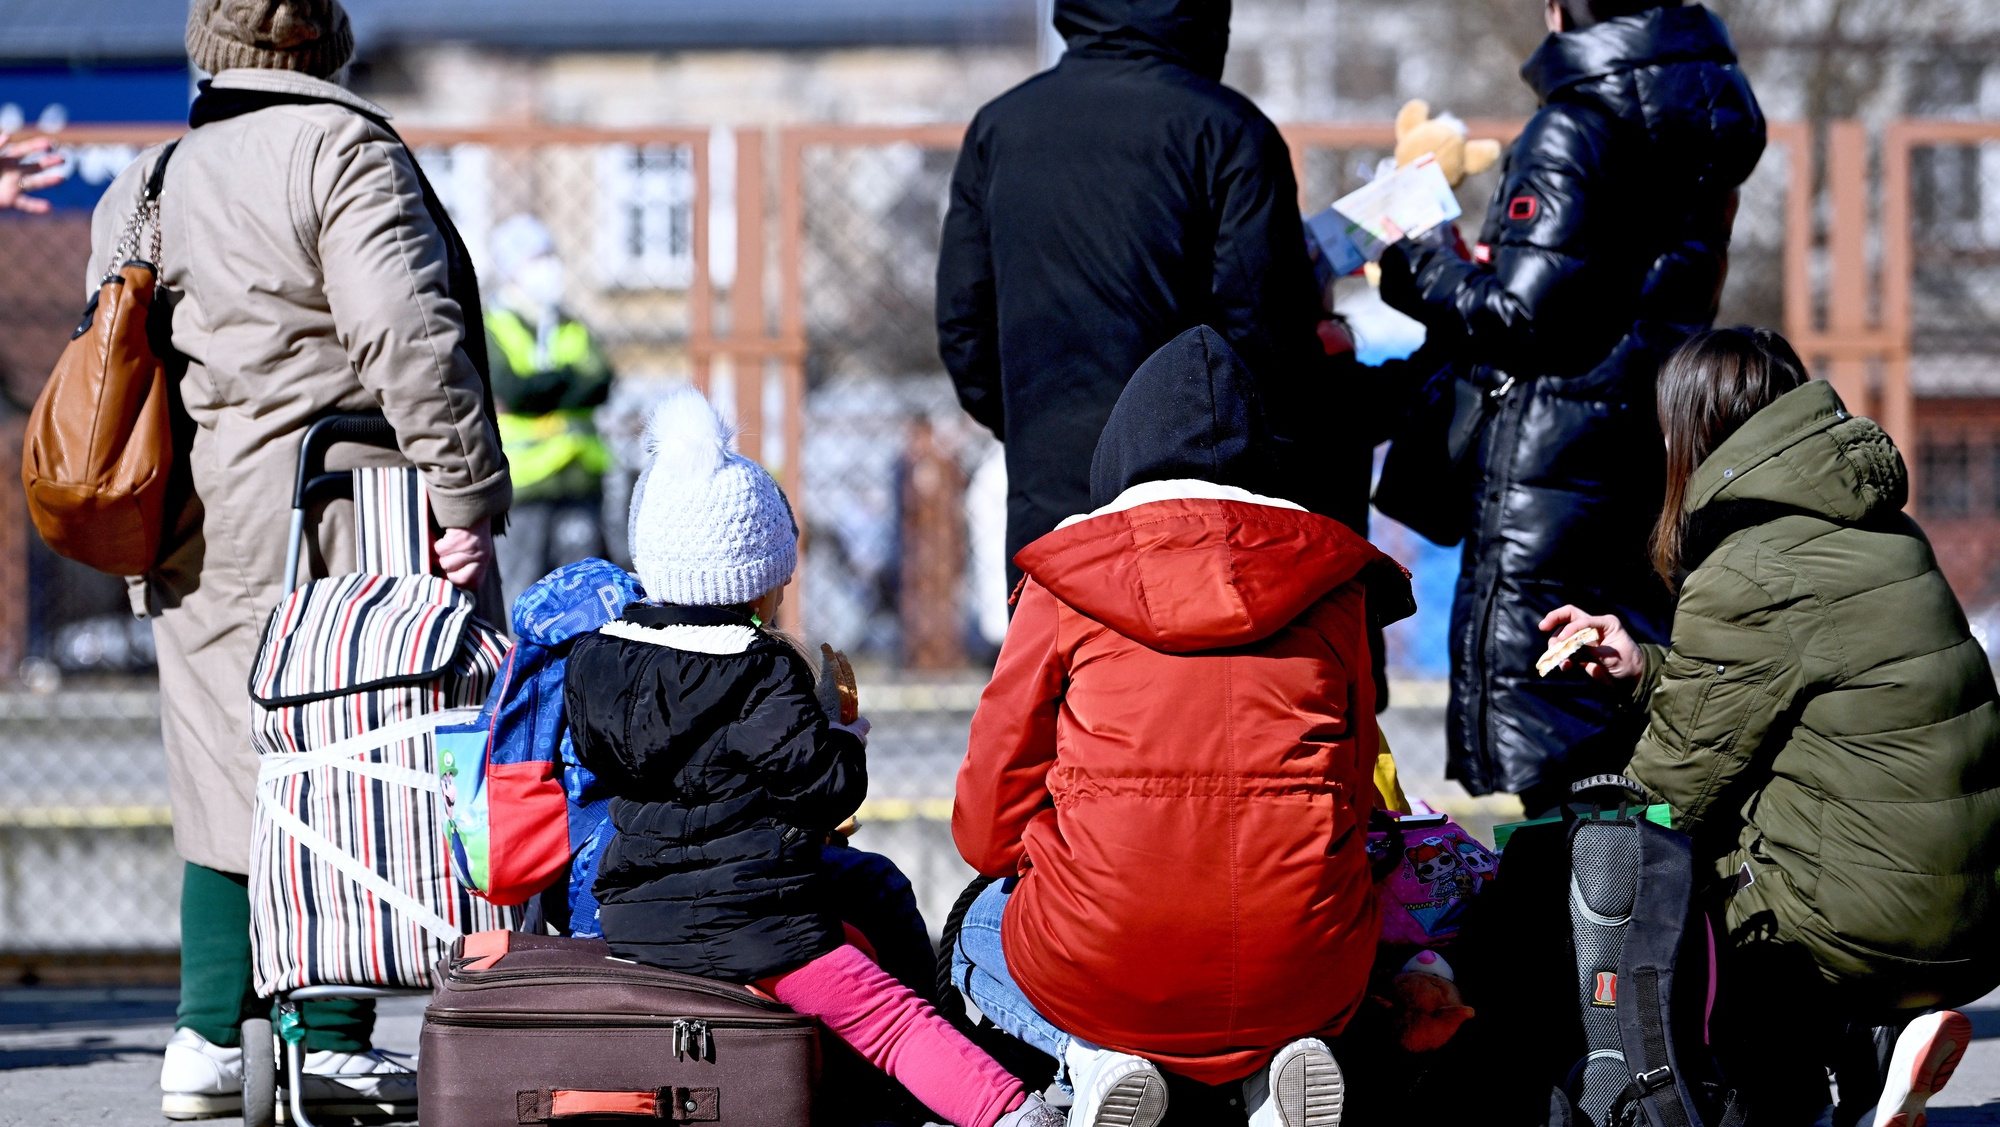 epa09819390 Refugees from Ukraine arrive at the train station in Przemysl, southeastern Poland, 12 March 2022. Since 24 February, 1.59 million people have crossed the Polish-Ukrainian border into Poland, Border Guard has reported on 12 March morning.  EPA/Darek Delmanowicz POLAND OUT